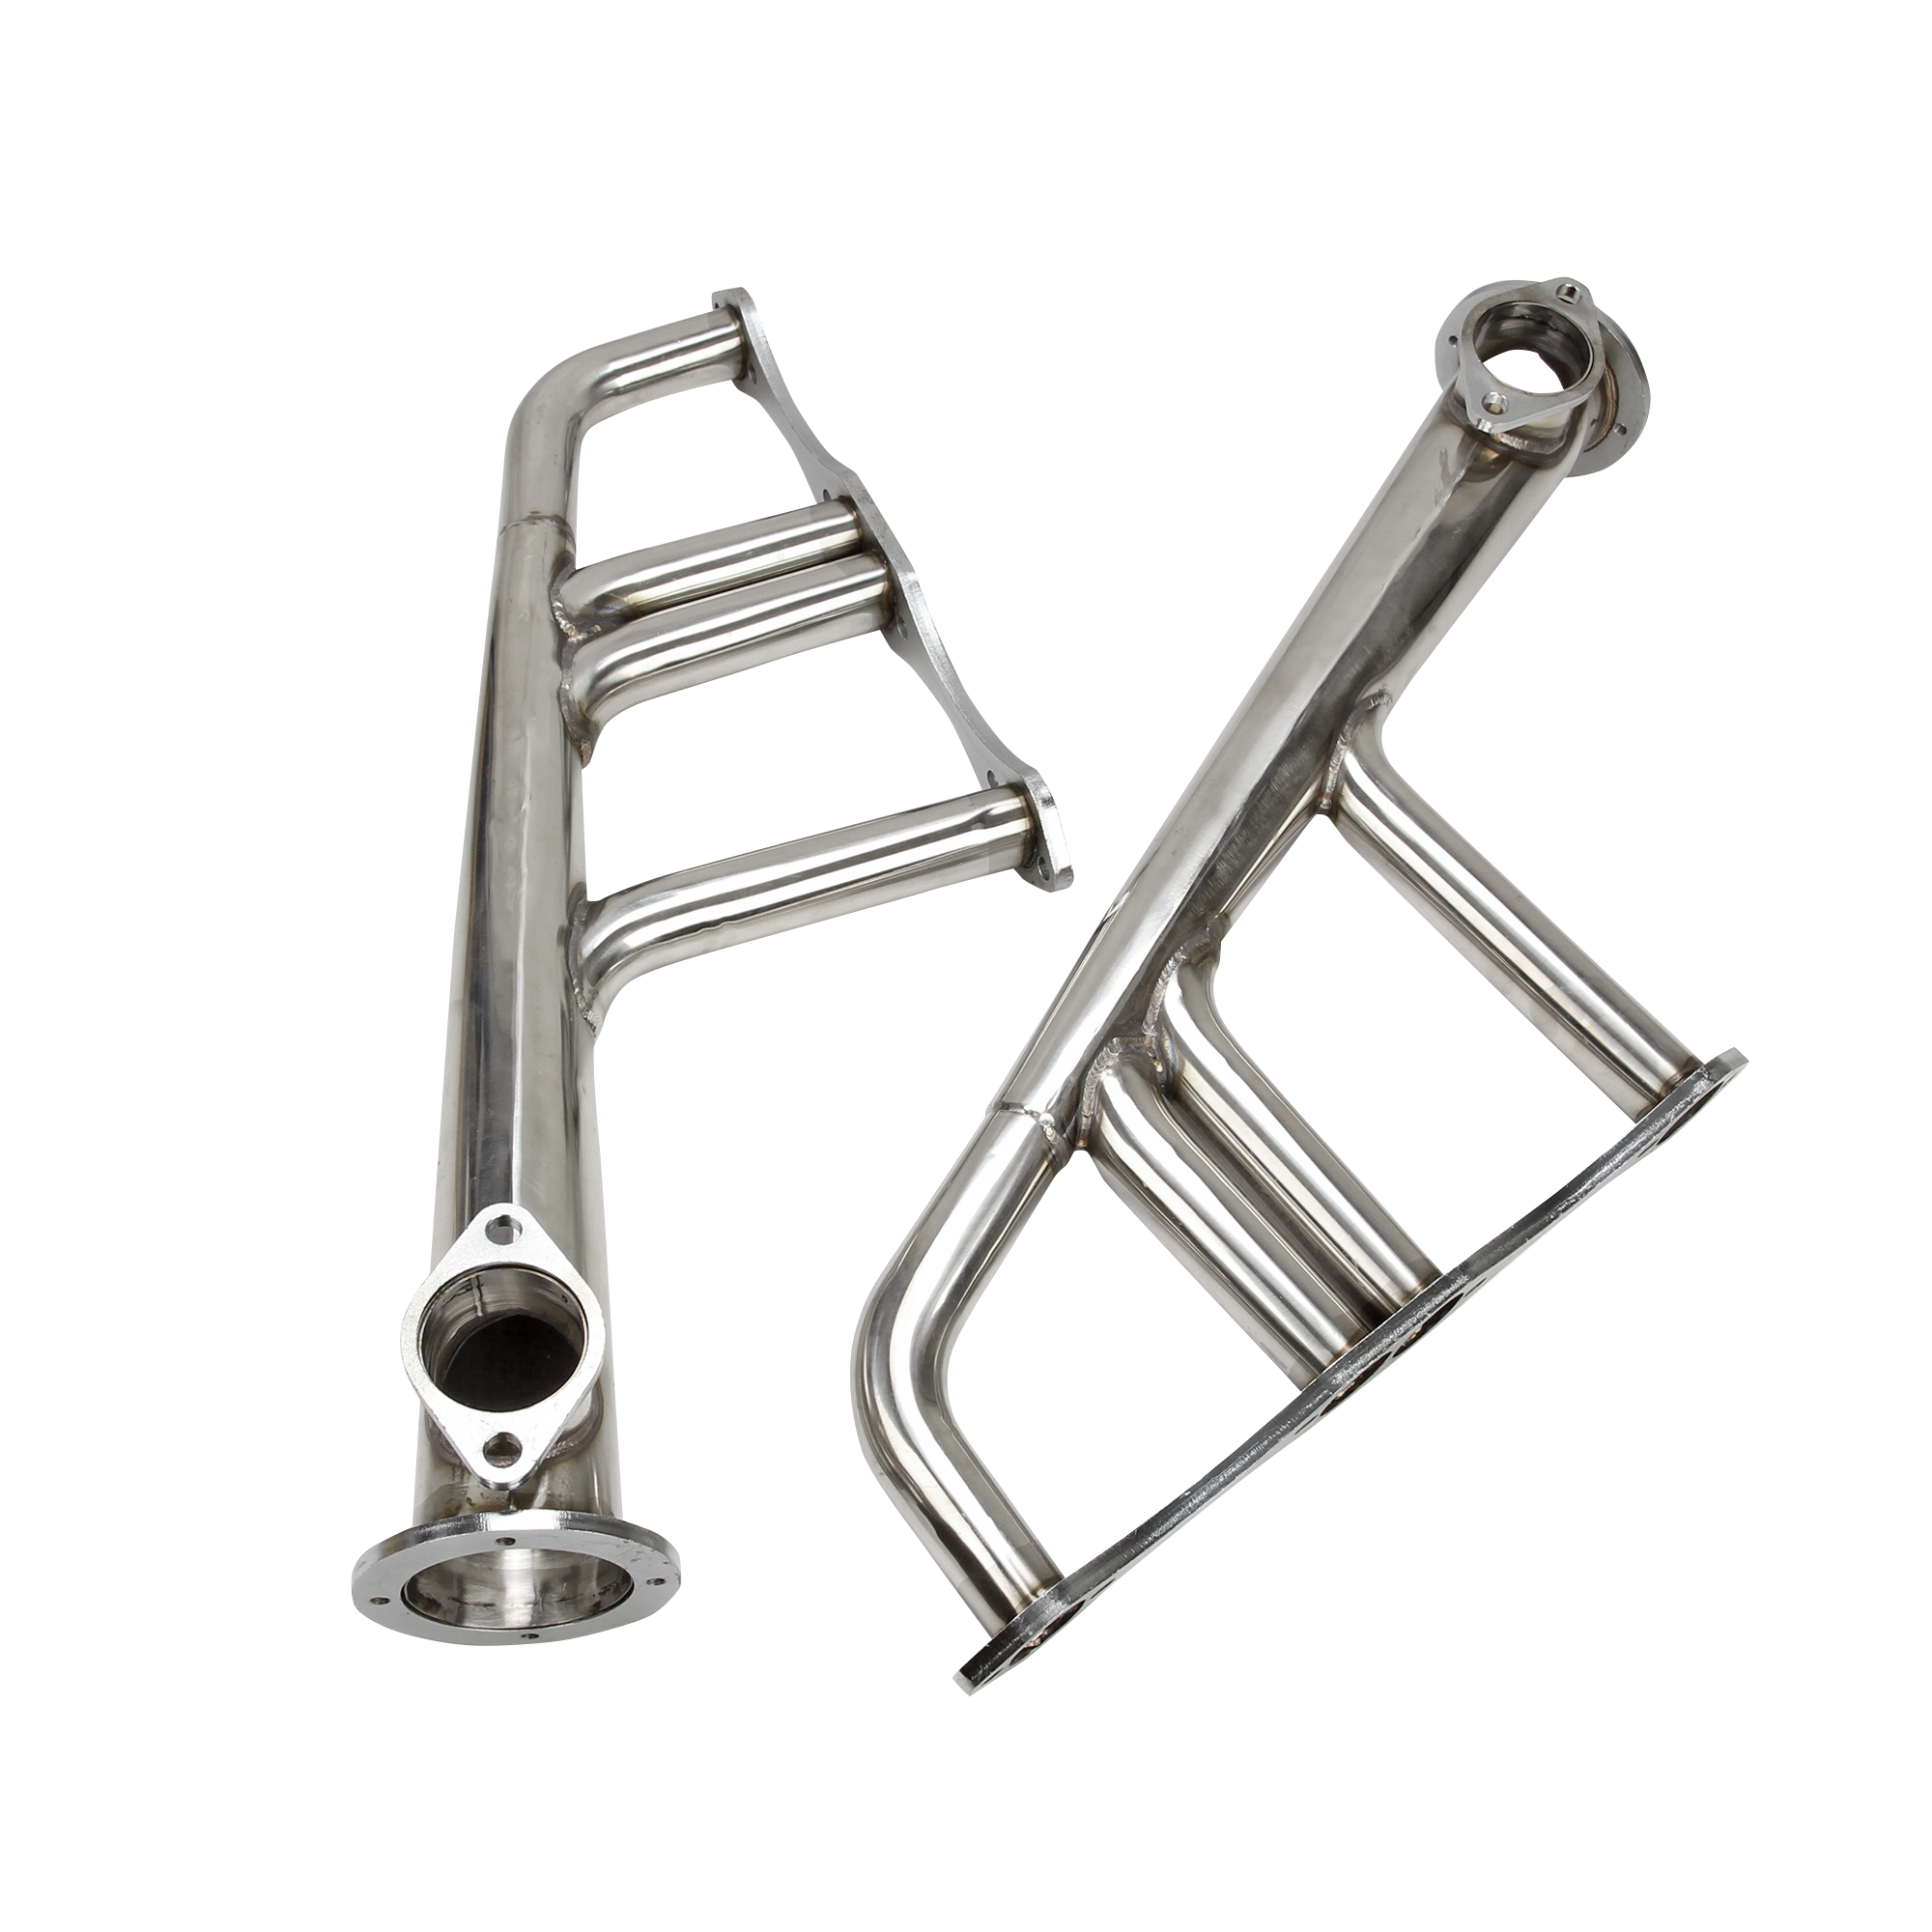 Small Block Chevy Lake Style Exhaust Header(Fits 265-400 C.i. with Standard Or Vortec Heads Including D-port ZZ-4 Style Heads (not LT-1)